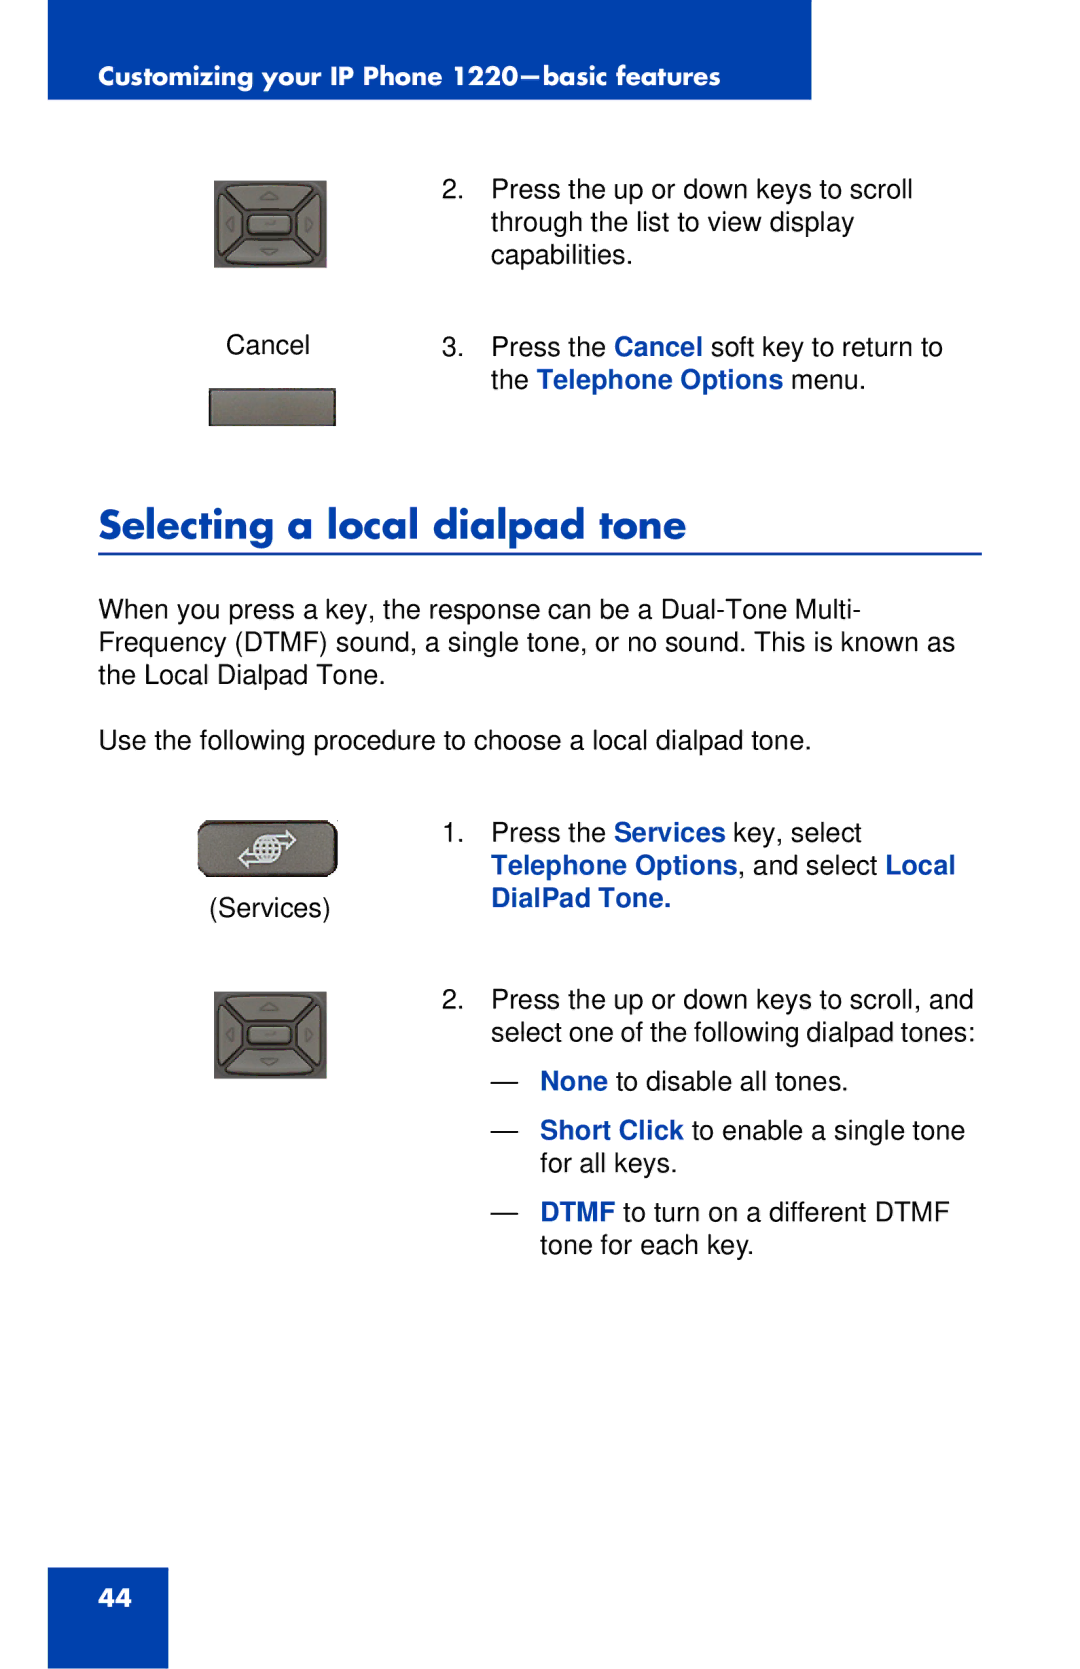 Nortel Networks IP Phone 1220 manual Selecting a local dialpad tone, Telephone Options , and select Local, DialPad Tone 